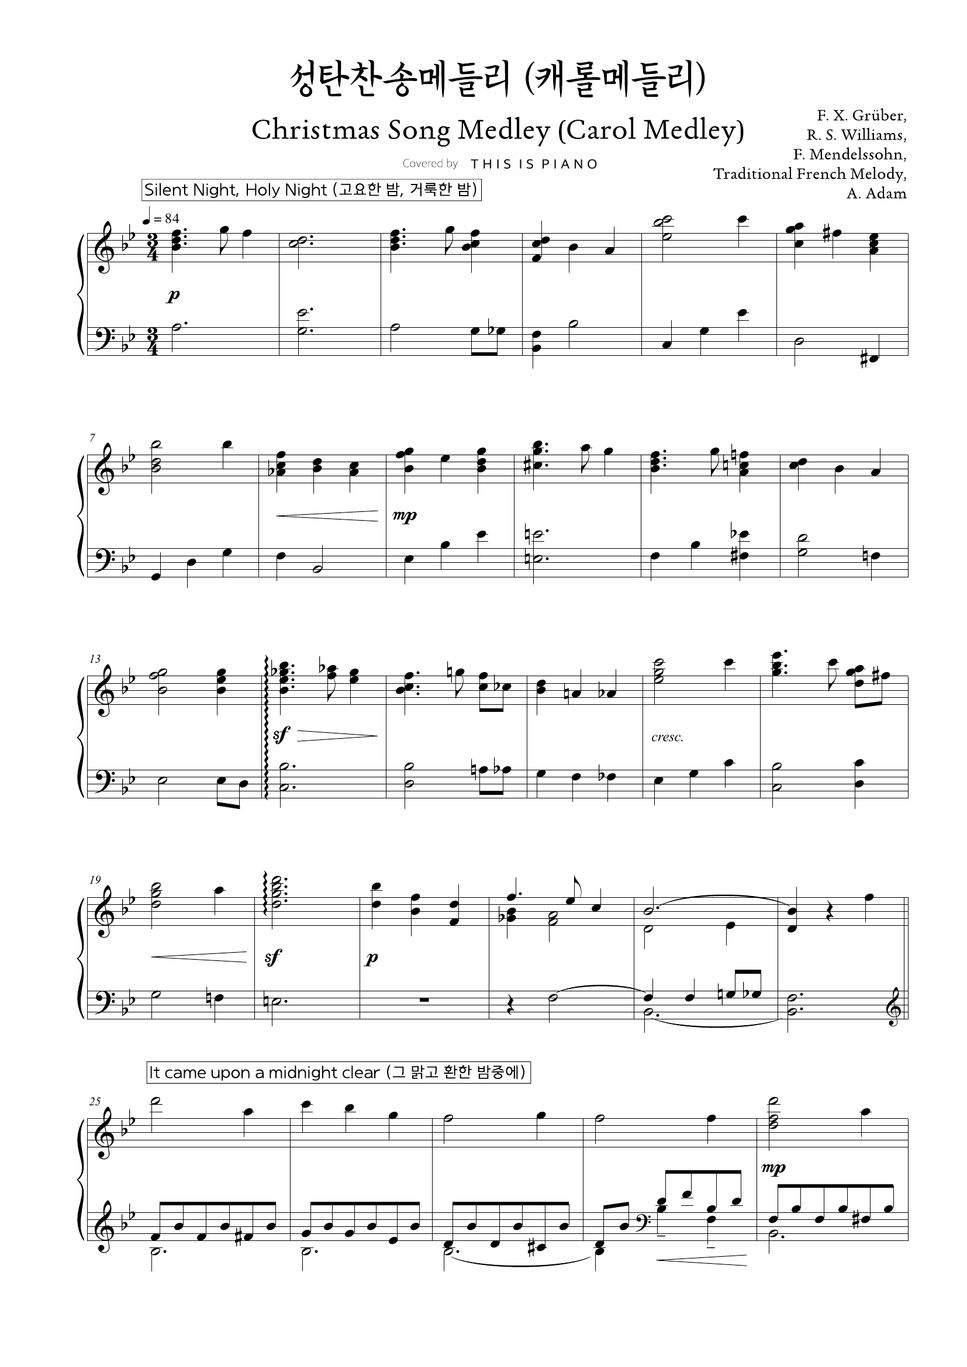 Carol - Christmas Song Medley (Easy Version) Sheets by THIS IS PIANO